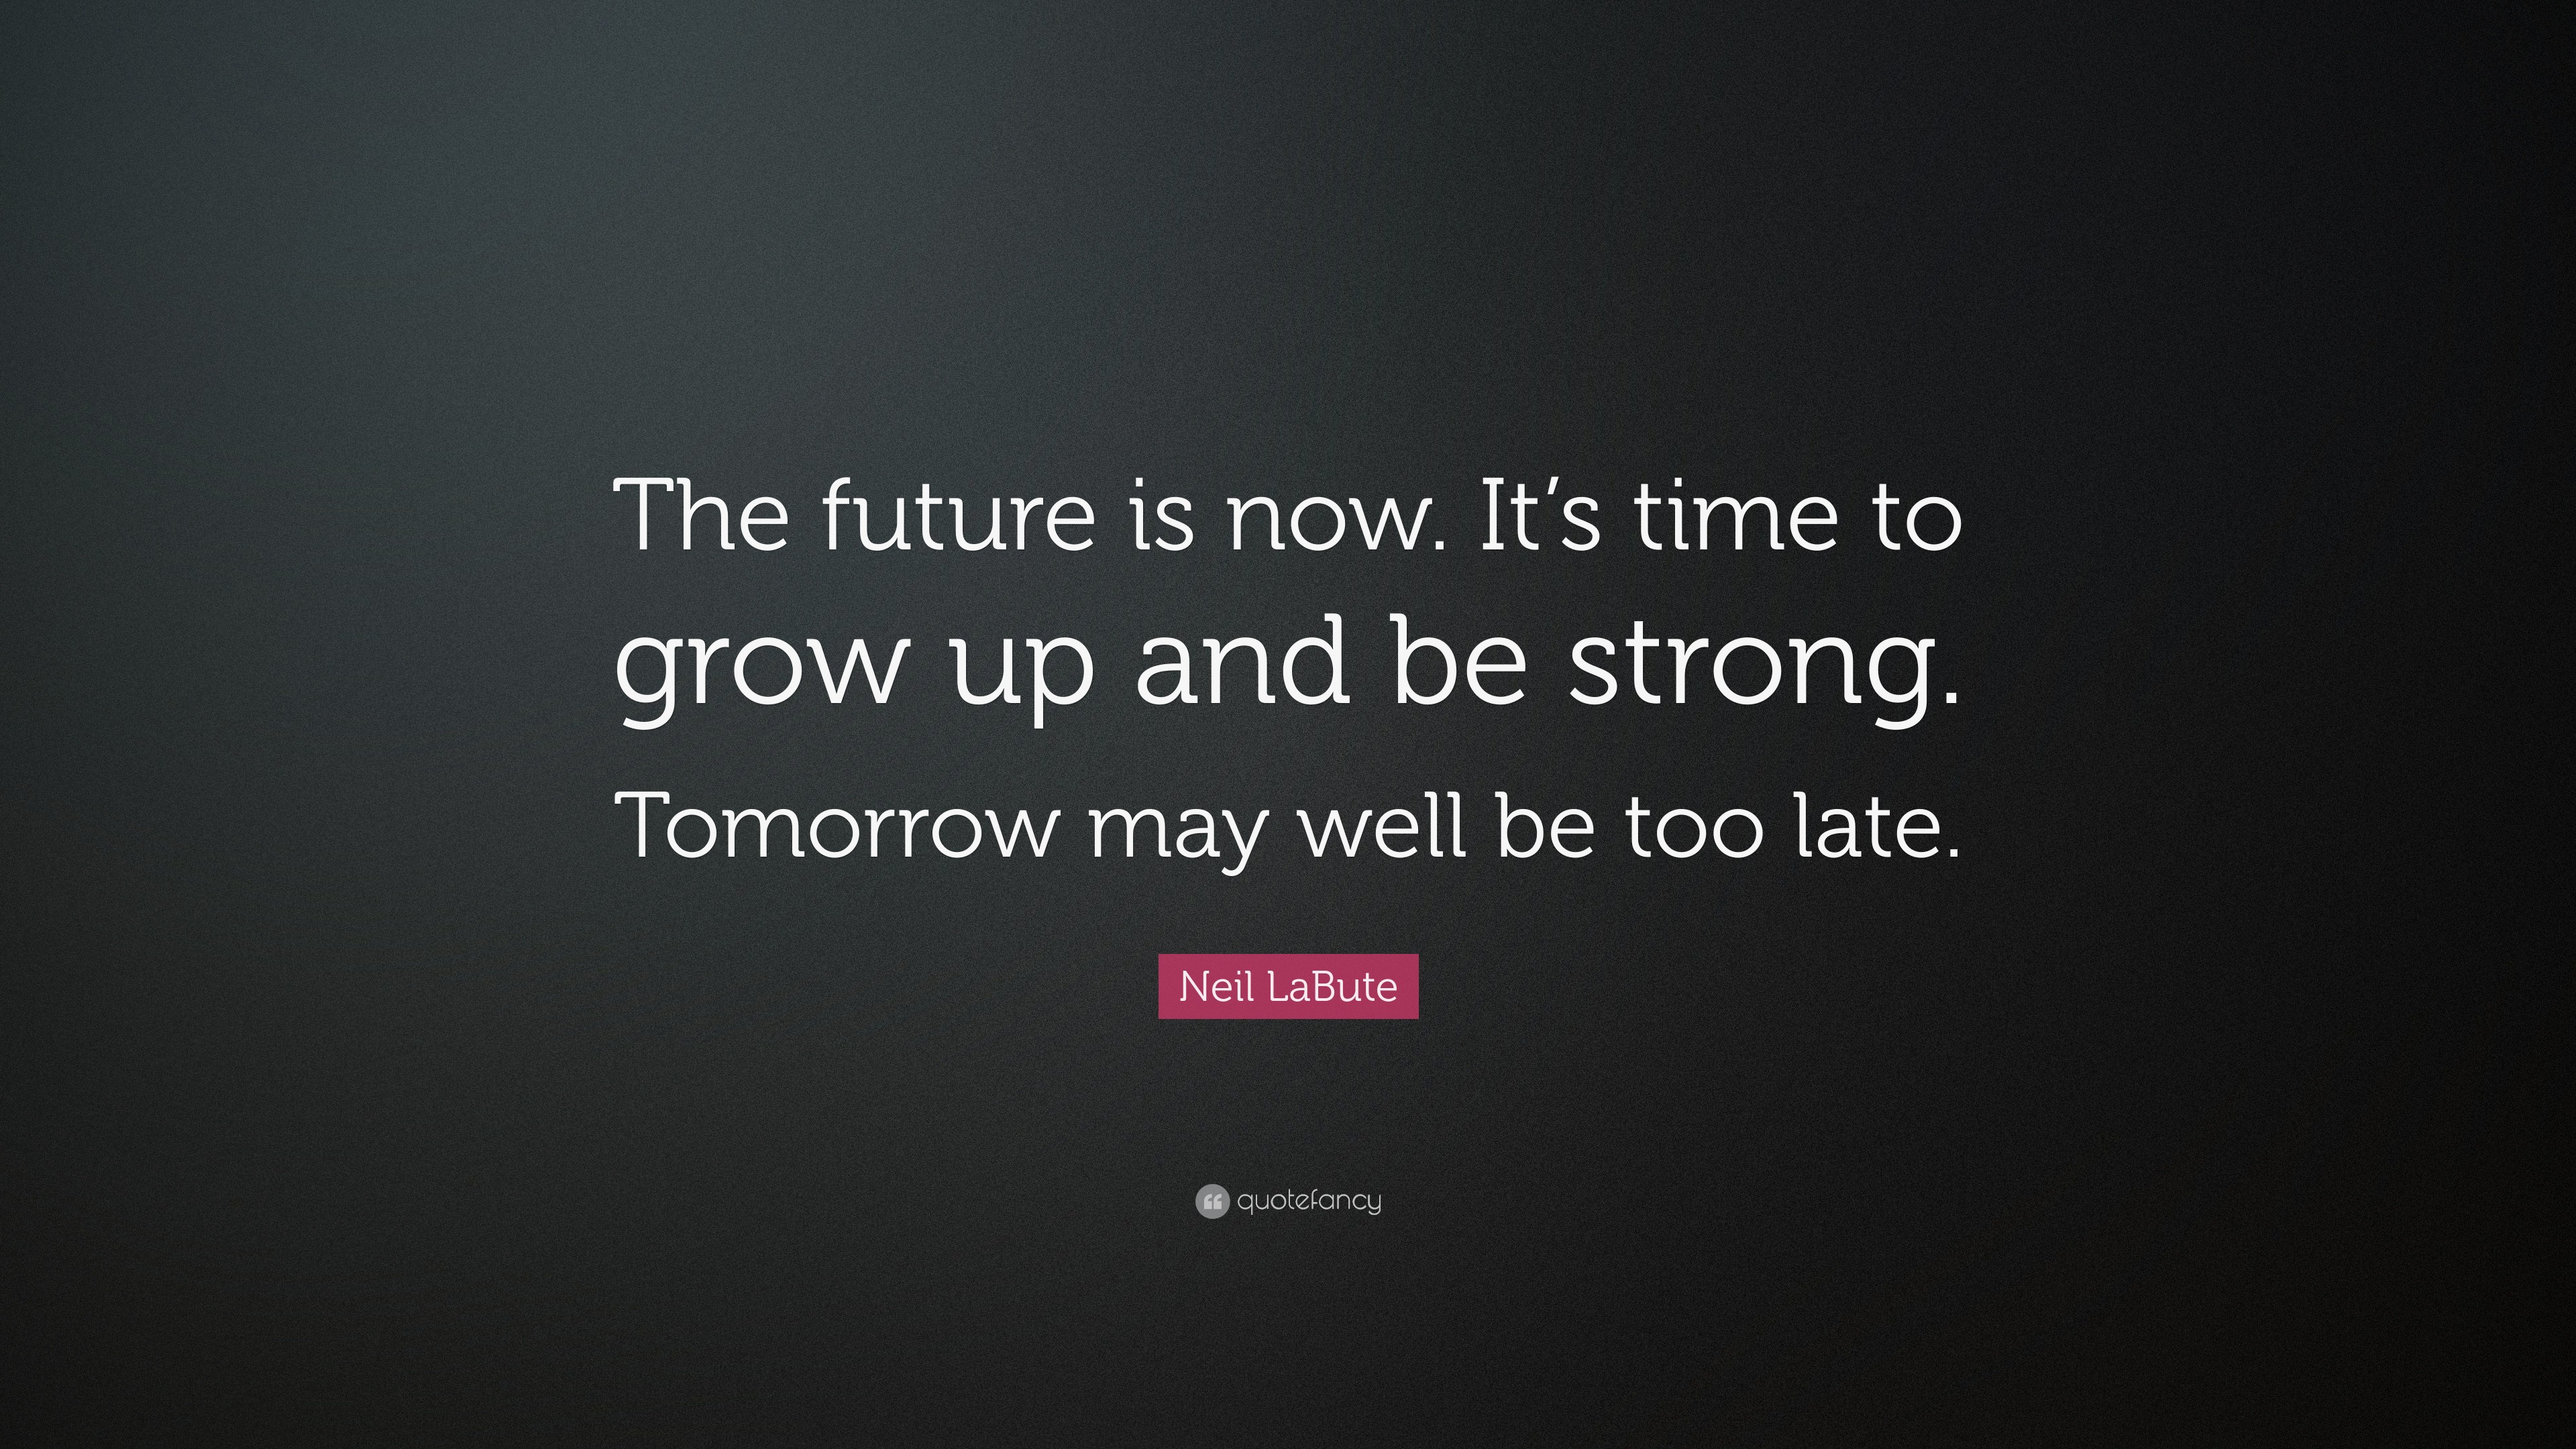 The future is now. It's time to grow up and be strong.